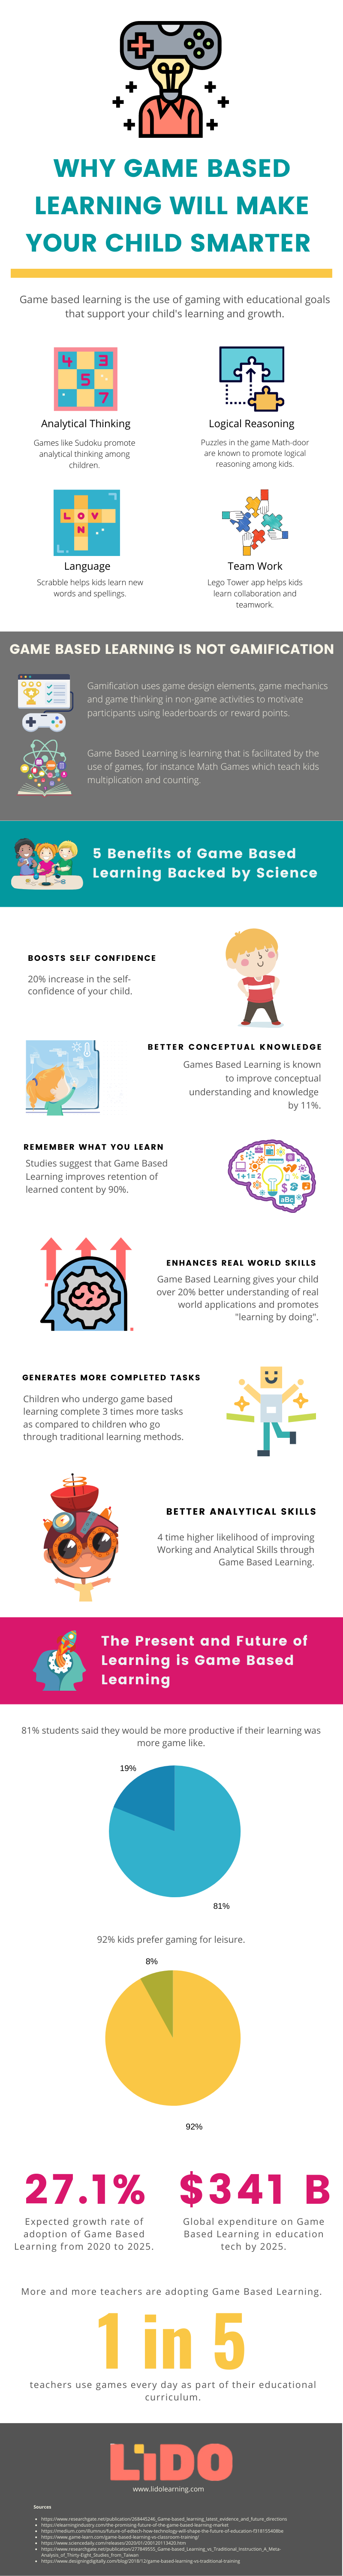 why game based learning will make your child smarter